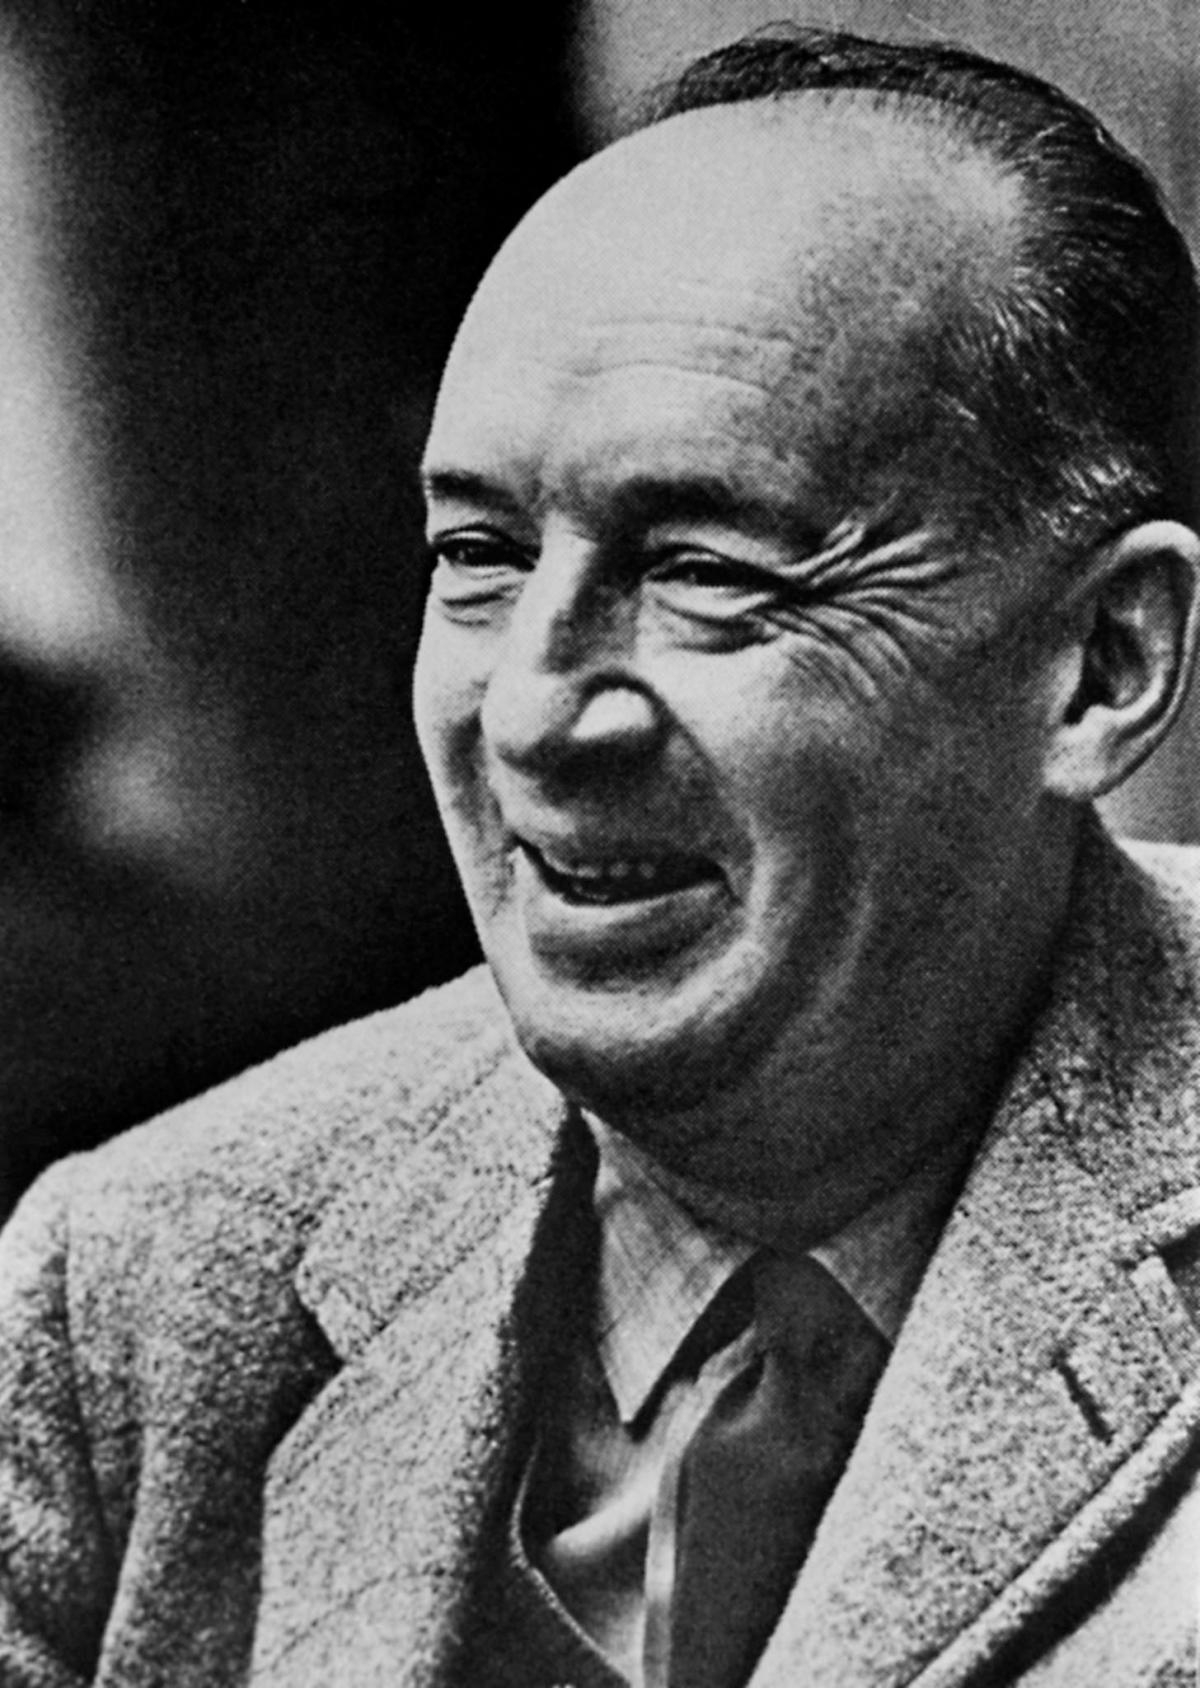 Head and shoulders photo of Nabokov, clean shaven and in a grey suit, striped tie